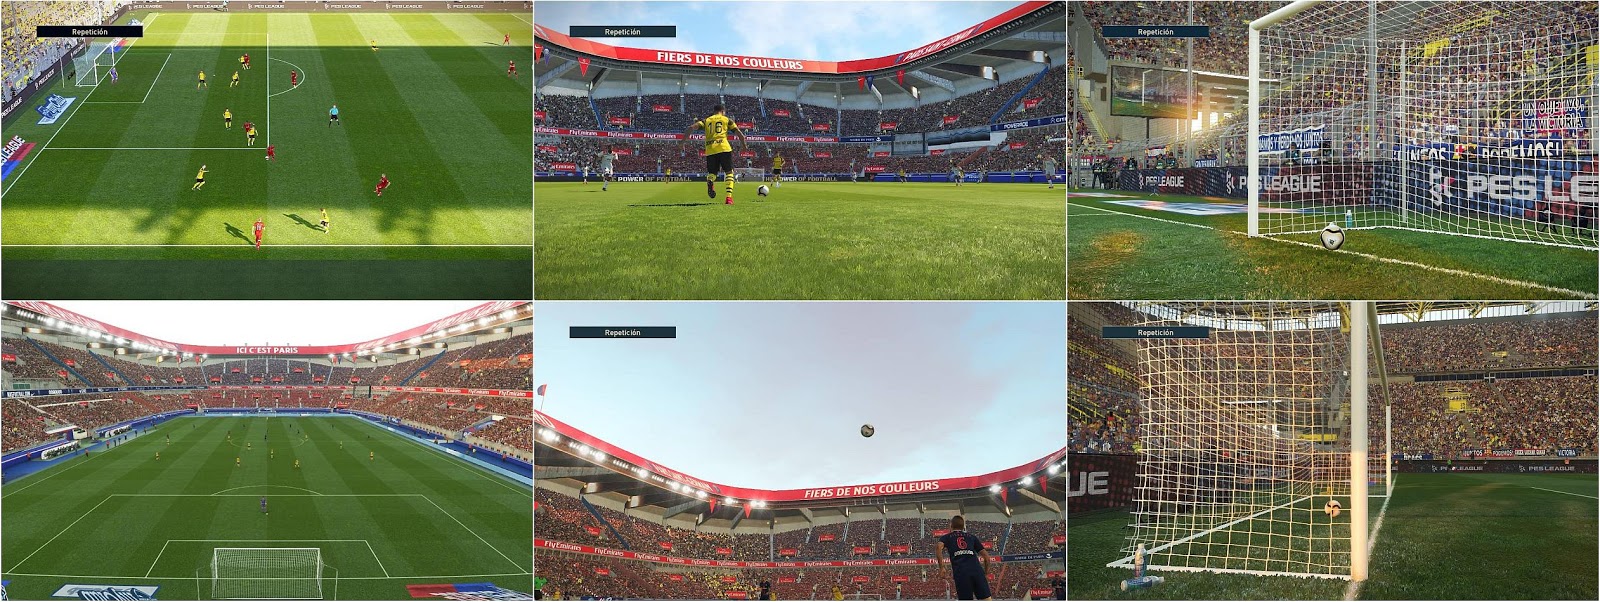 PES 2017 New Gameplay Patch v.1.5.01 by Jostike Games ~